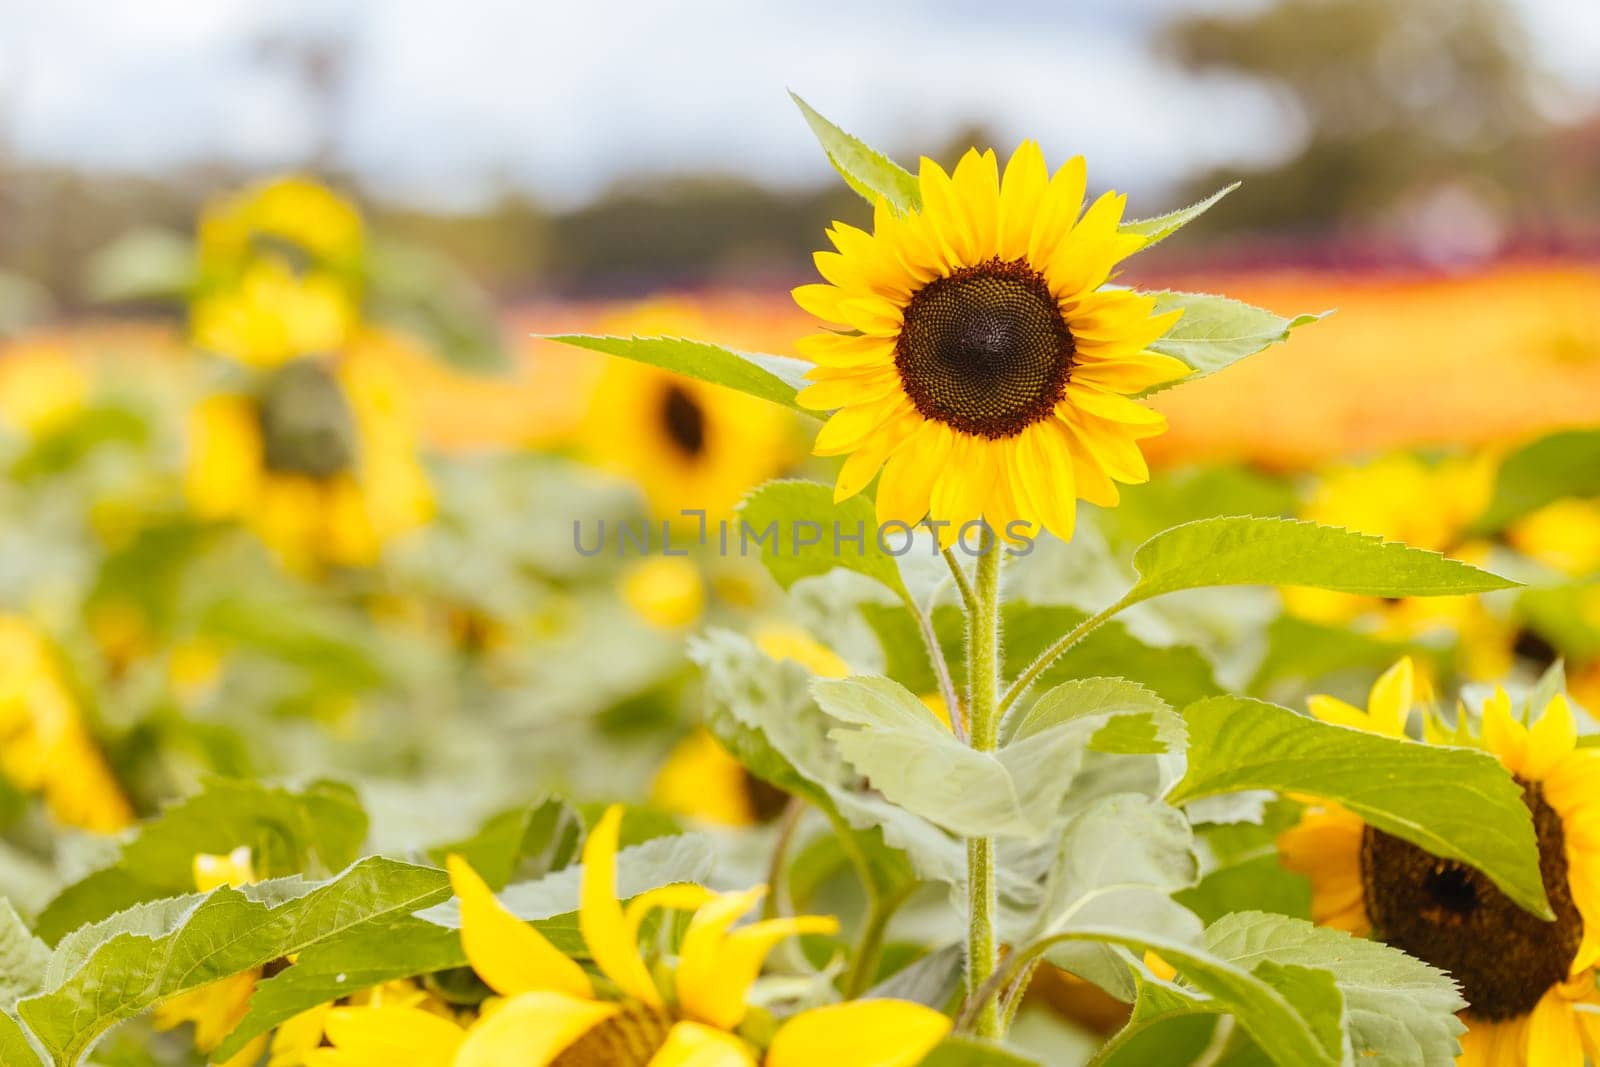 Sunflowers in the Dandeong Ranges in Australia by FiledIMAGE